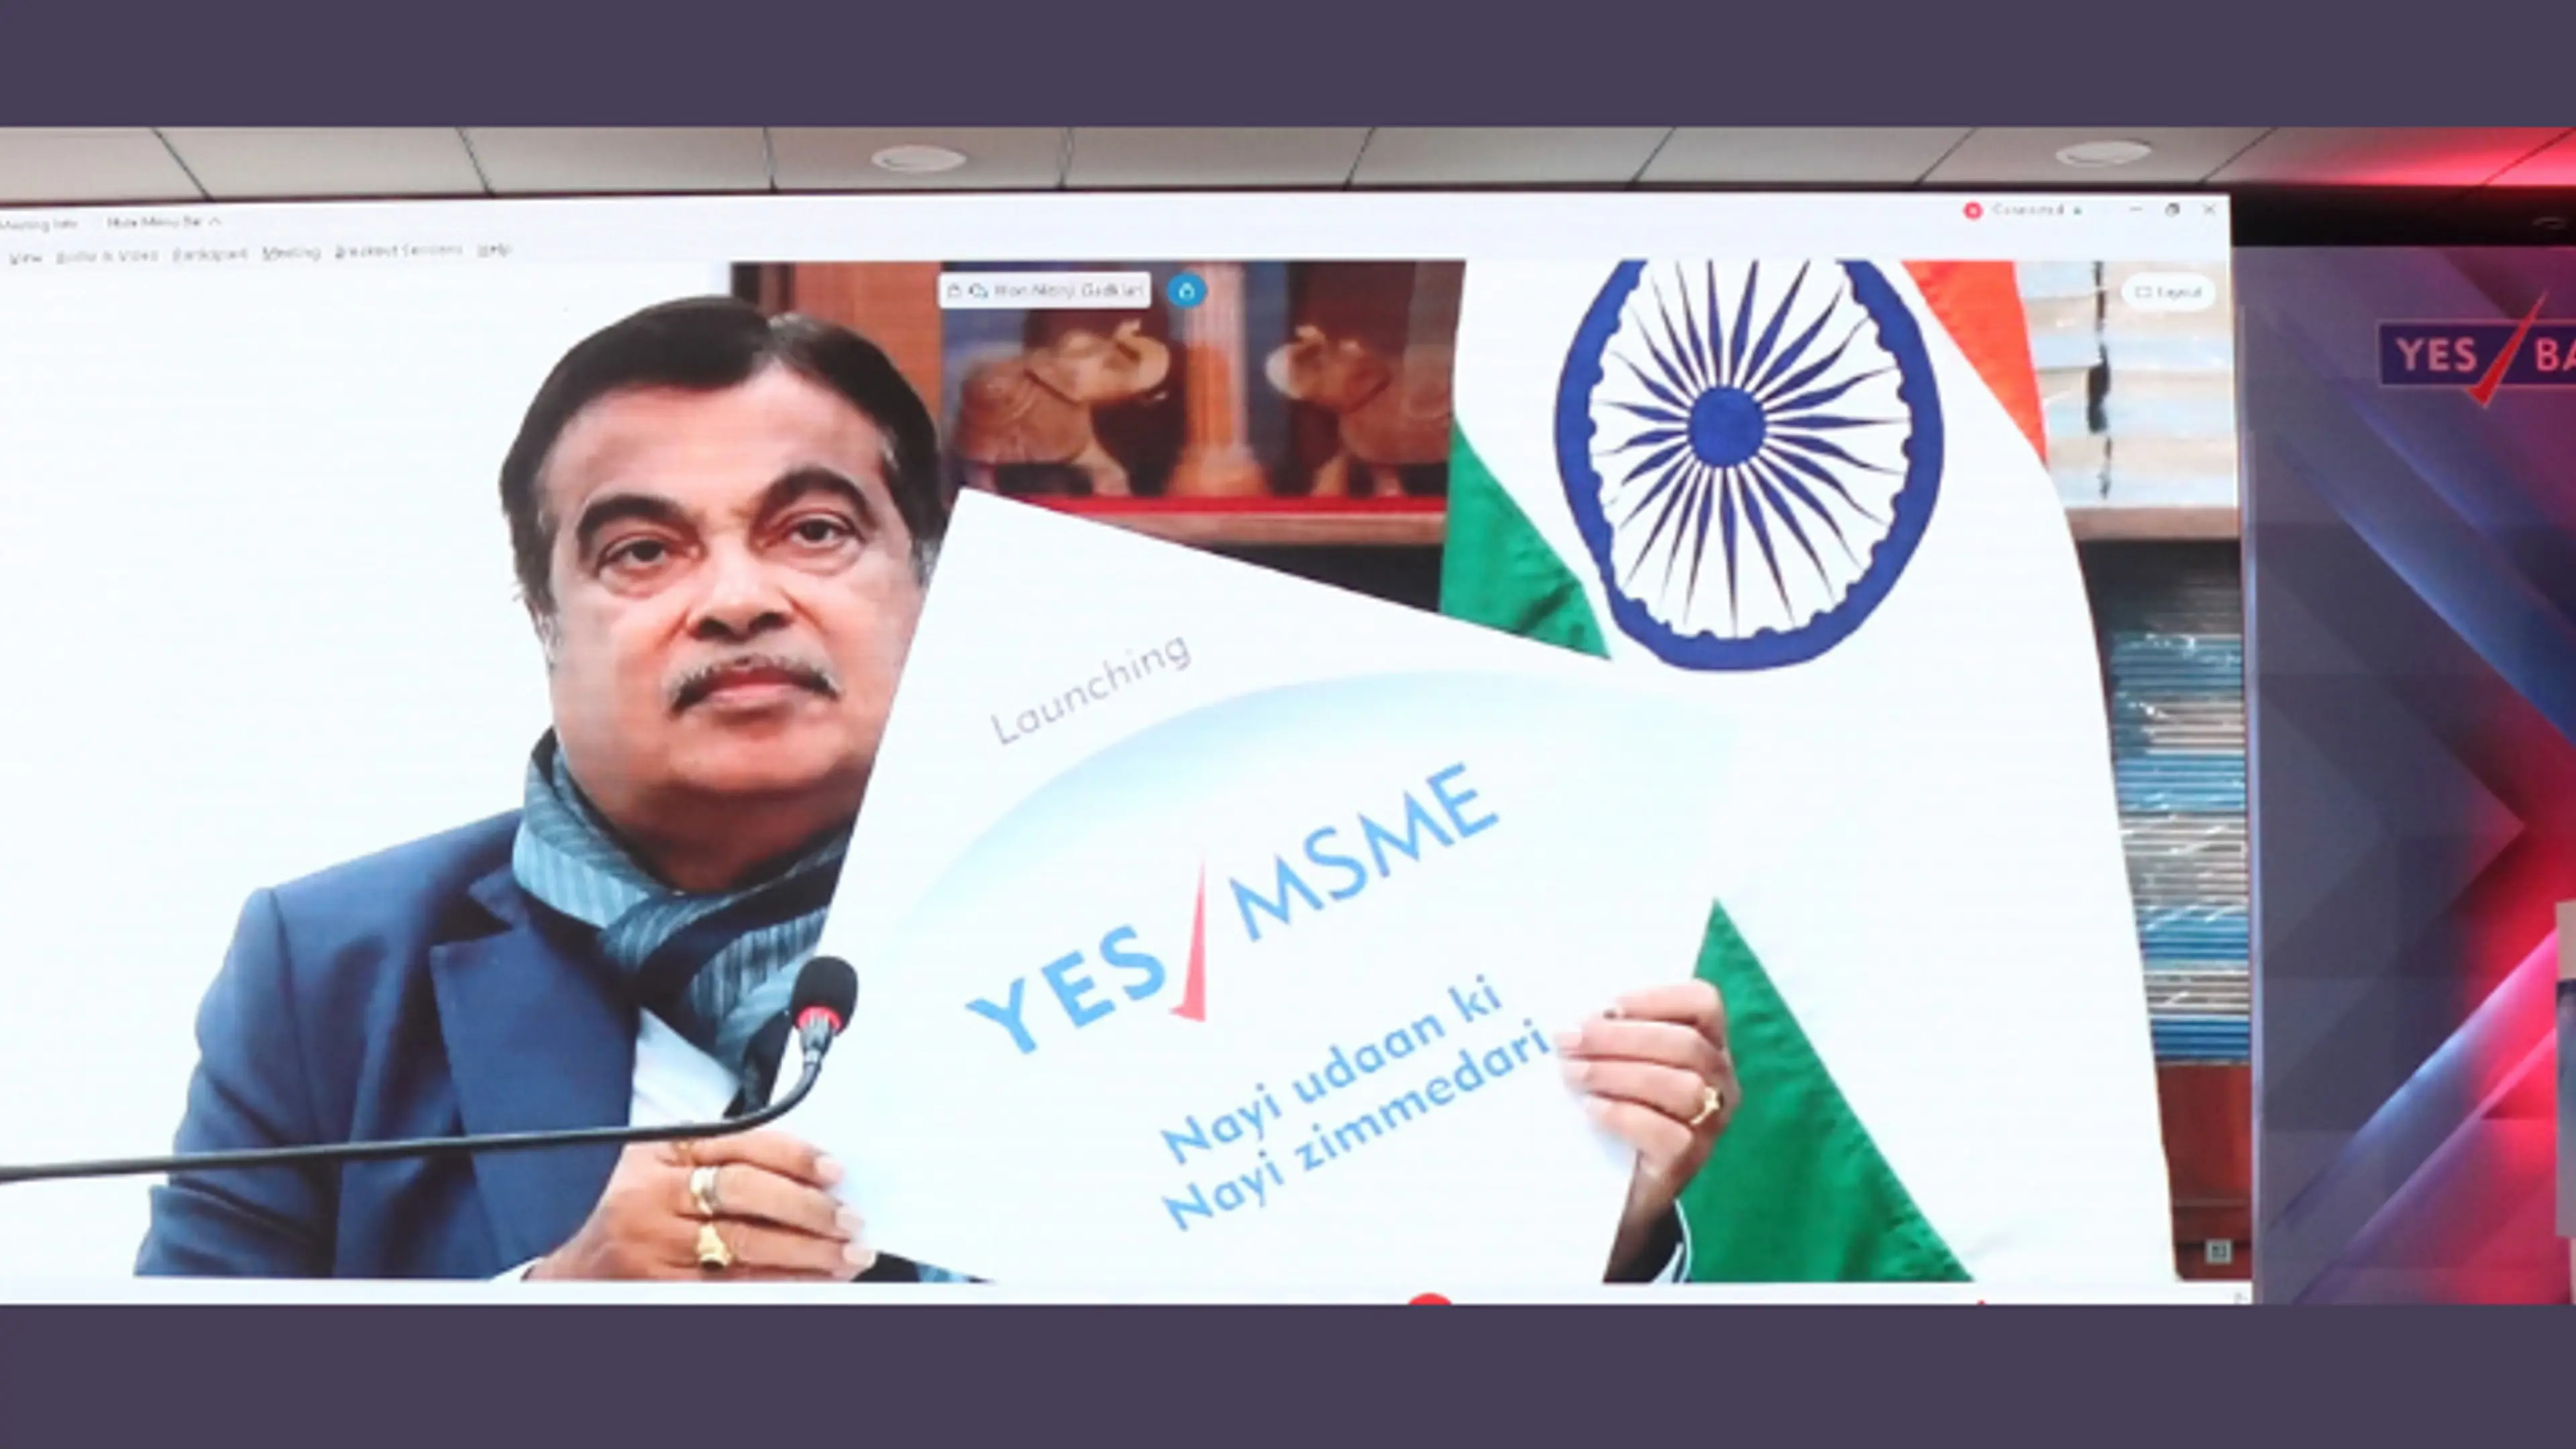 With the launch of YES MSME initiative, YES BANK is empowering MSMEs to reach new milestones of growth

